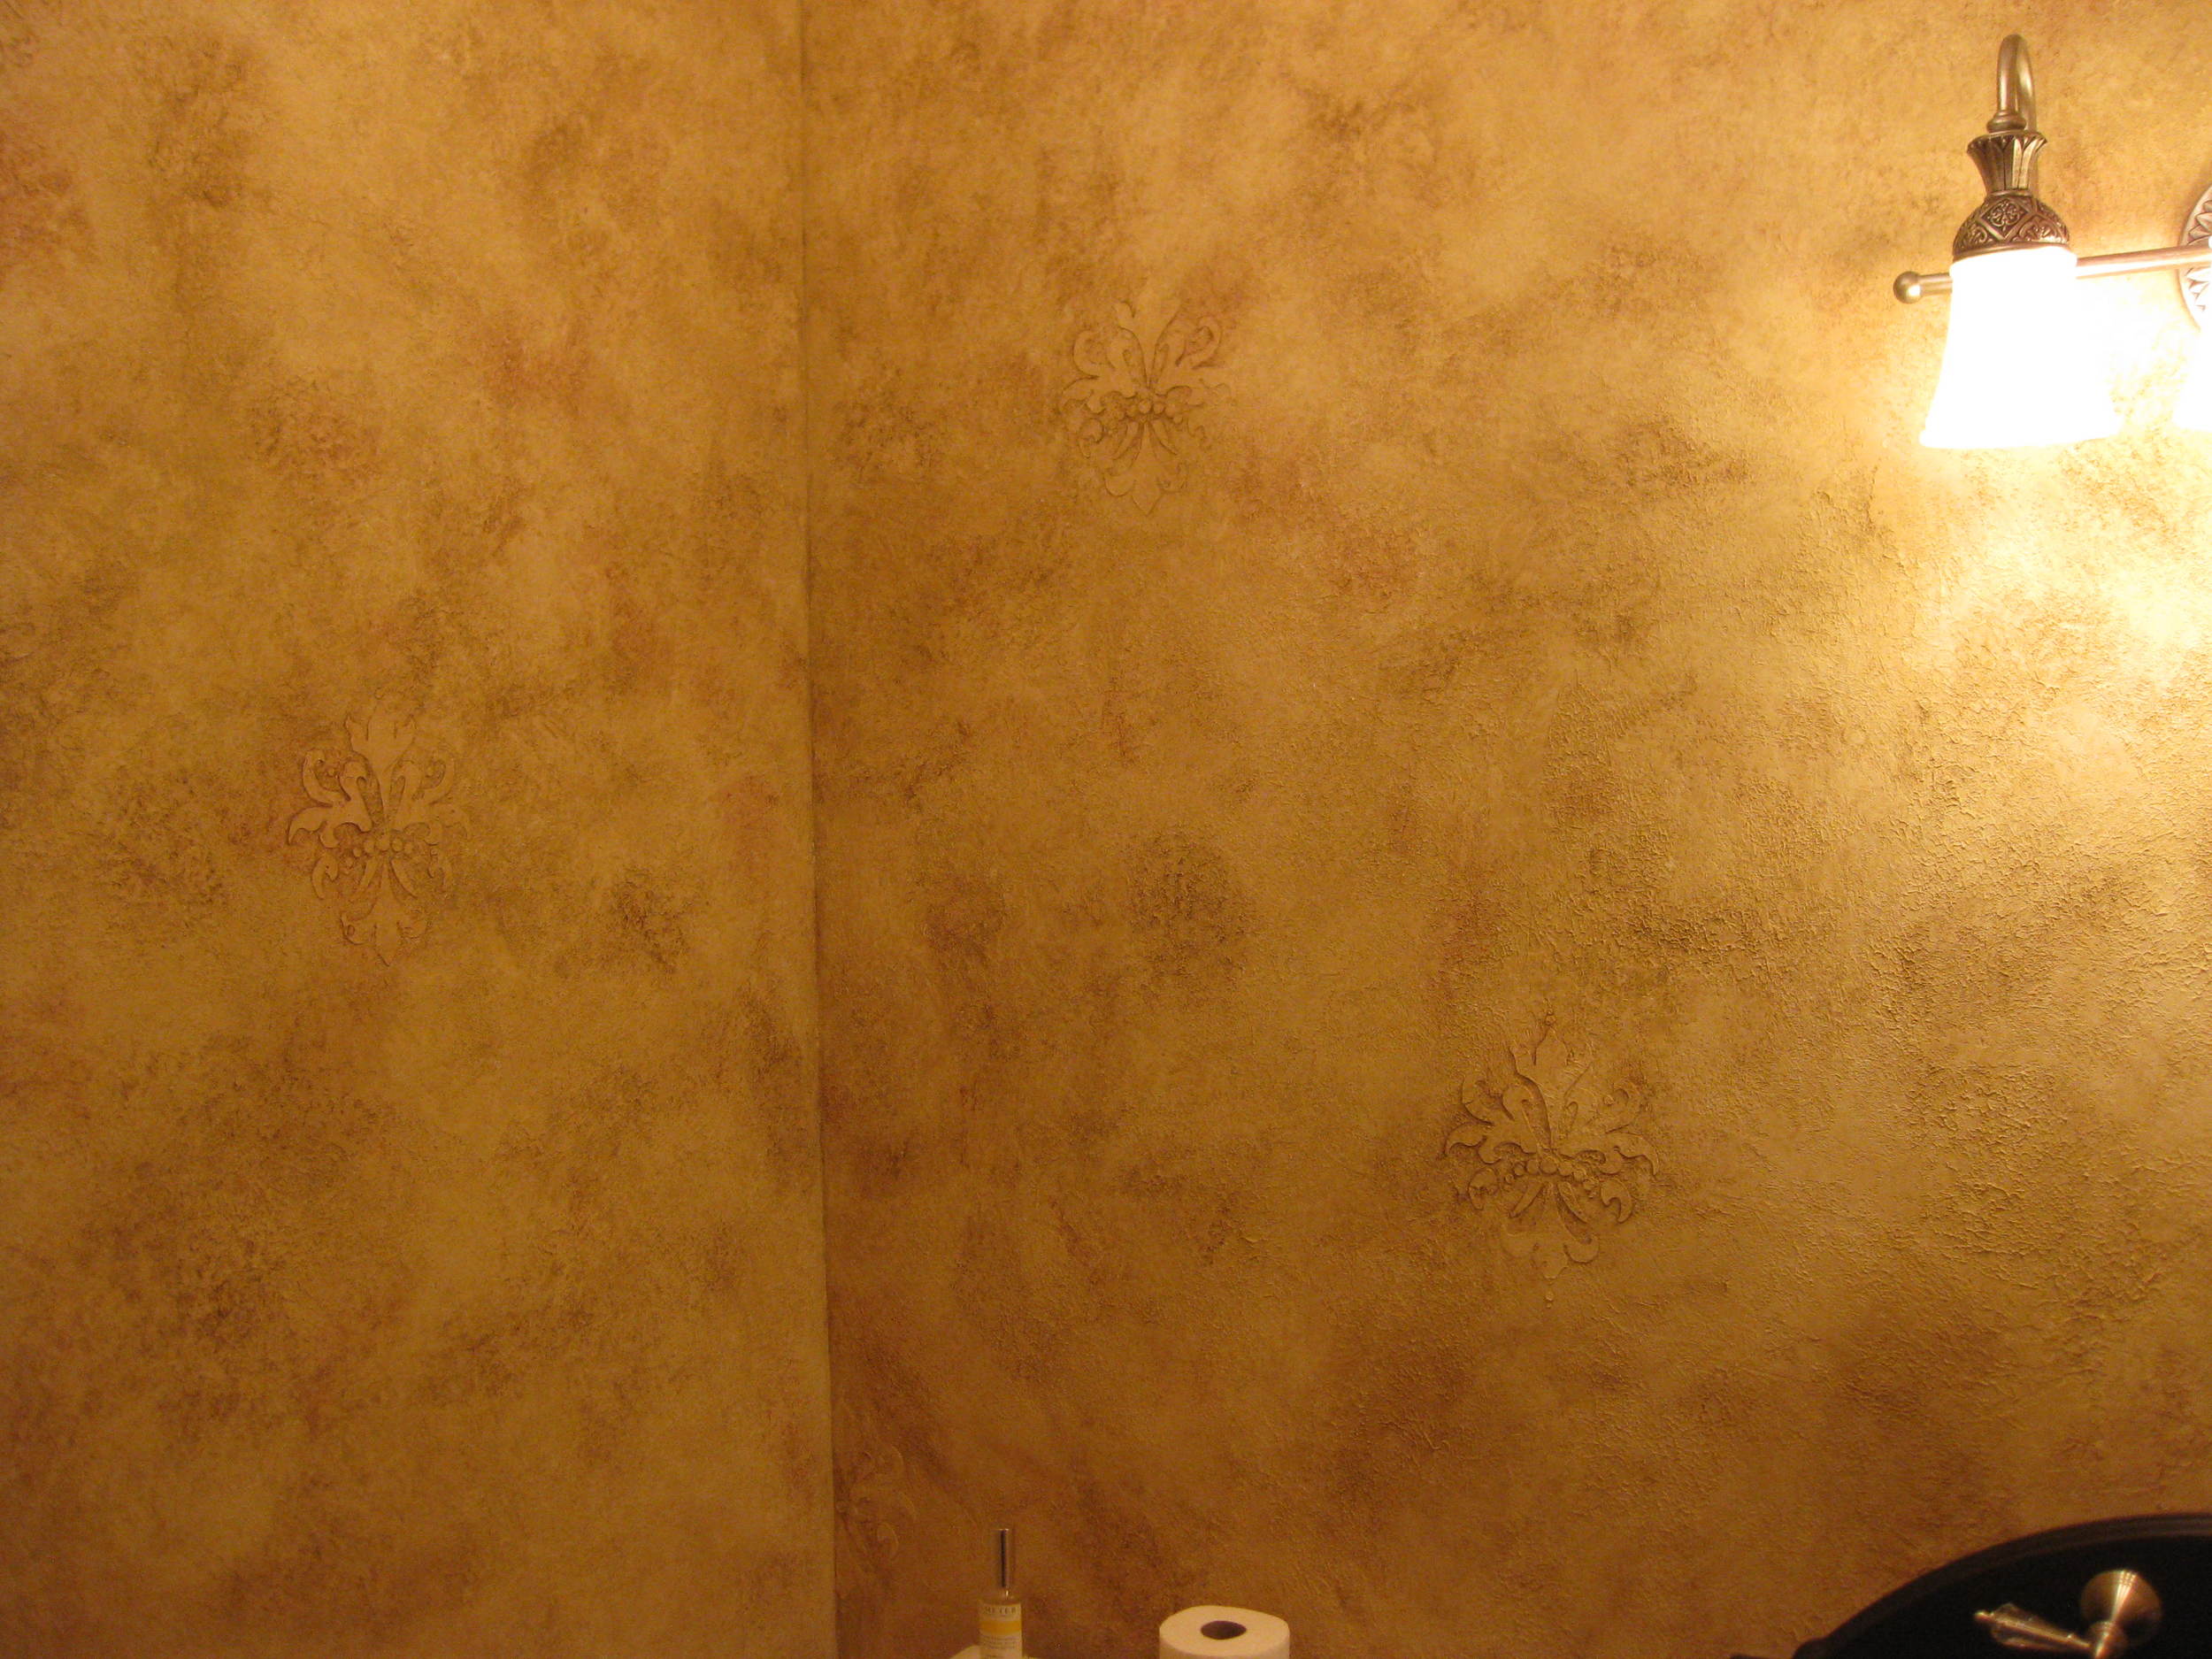 Textured Walls and Raised Stencil